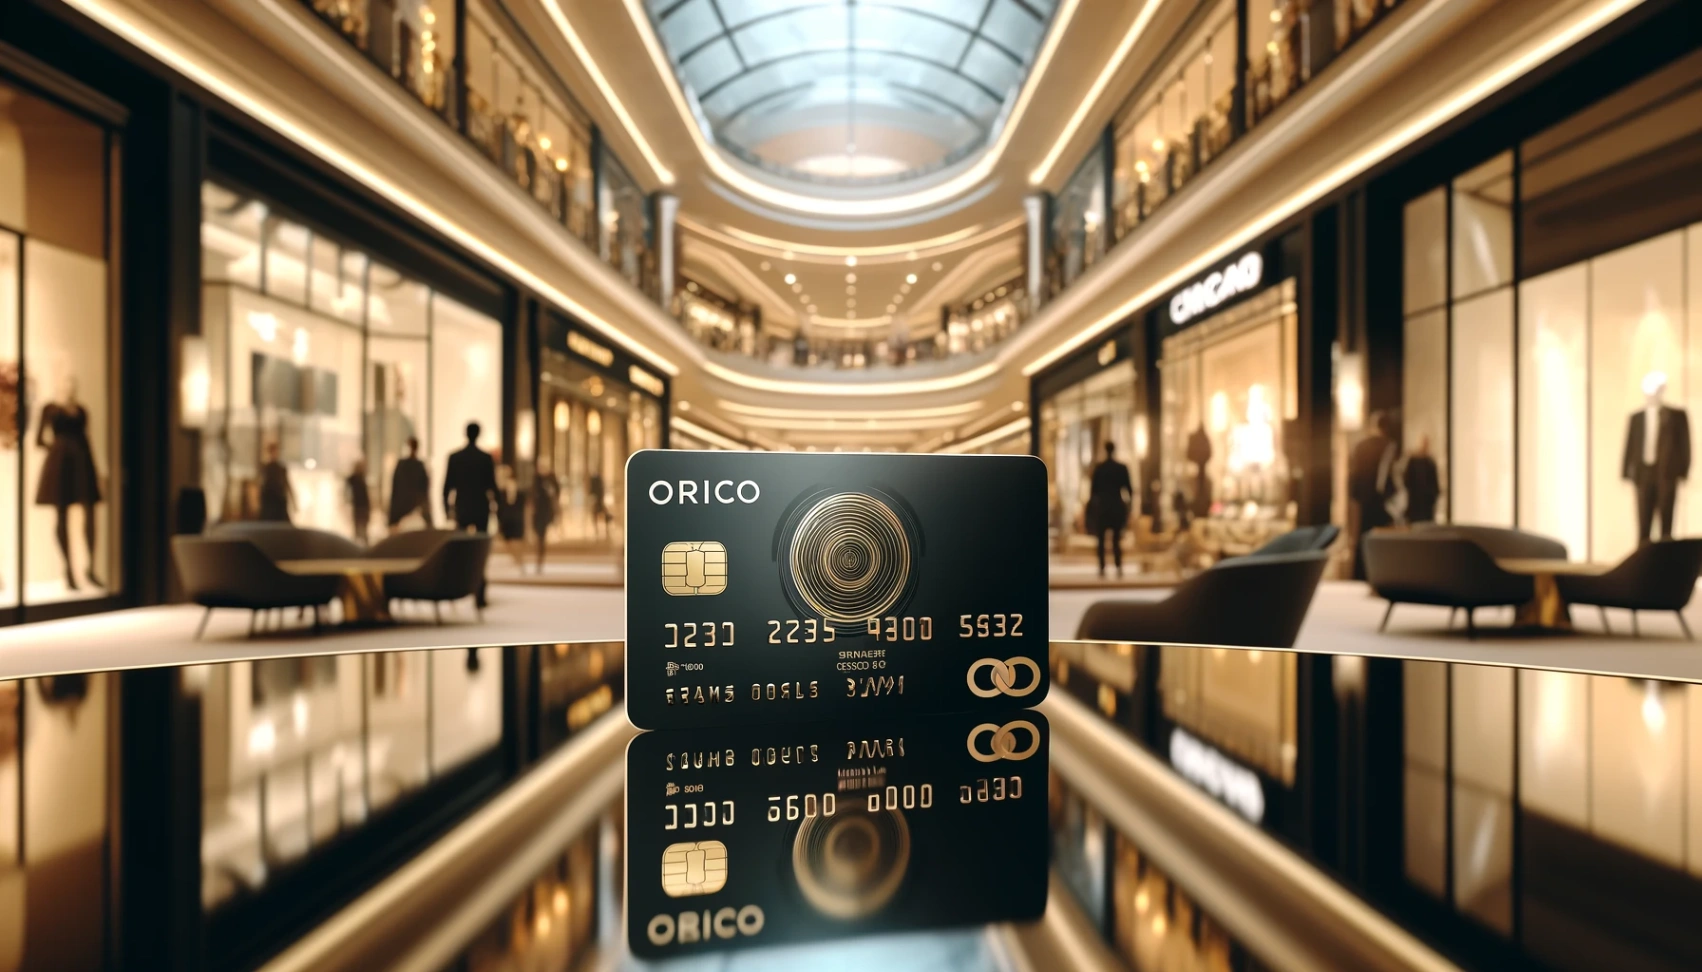 A Step-by-Step Online Guide to Apply for the Orico Card